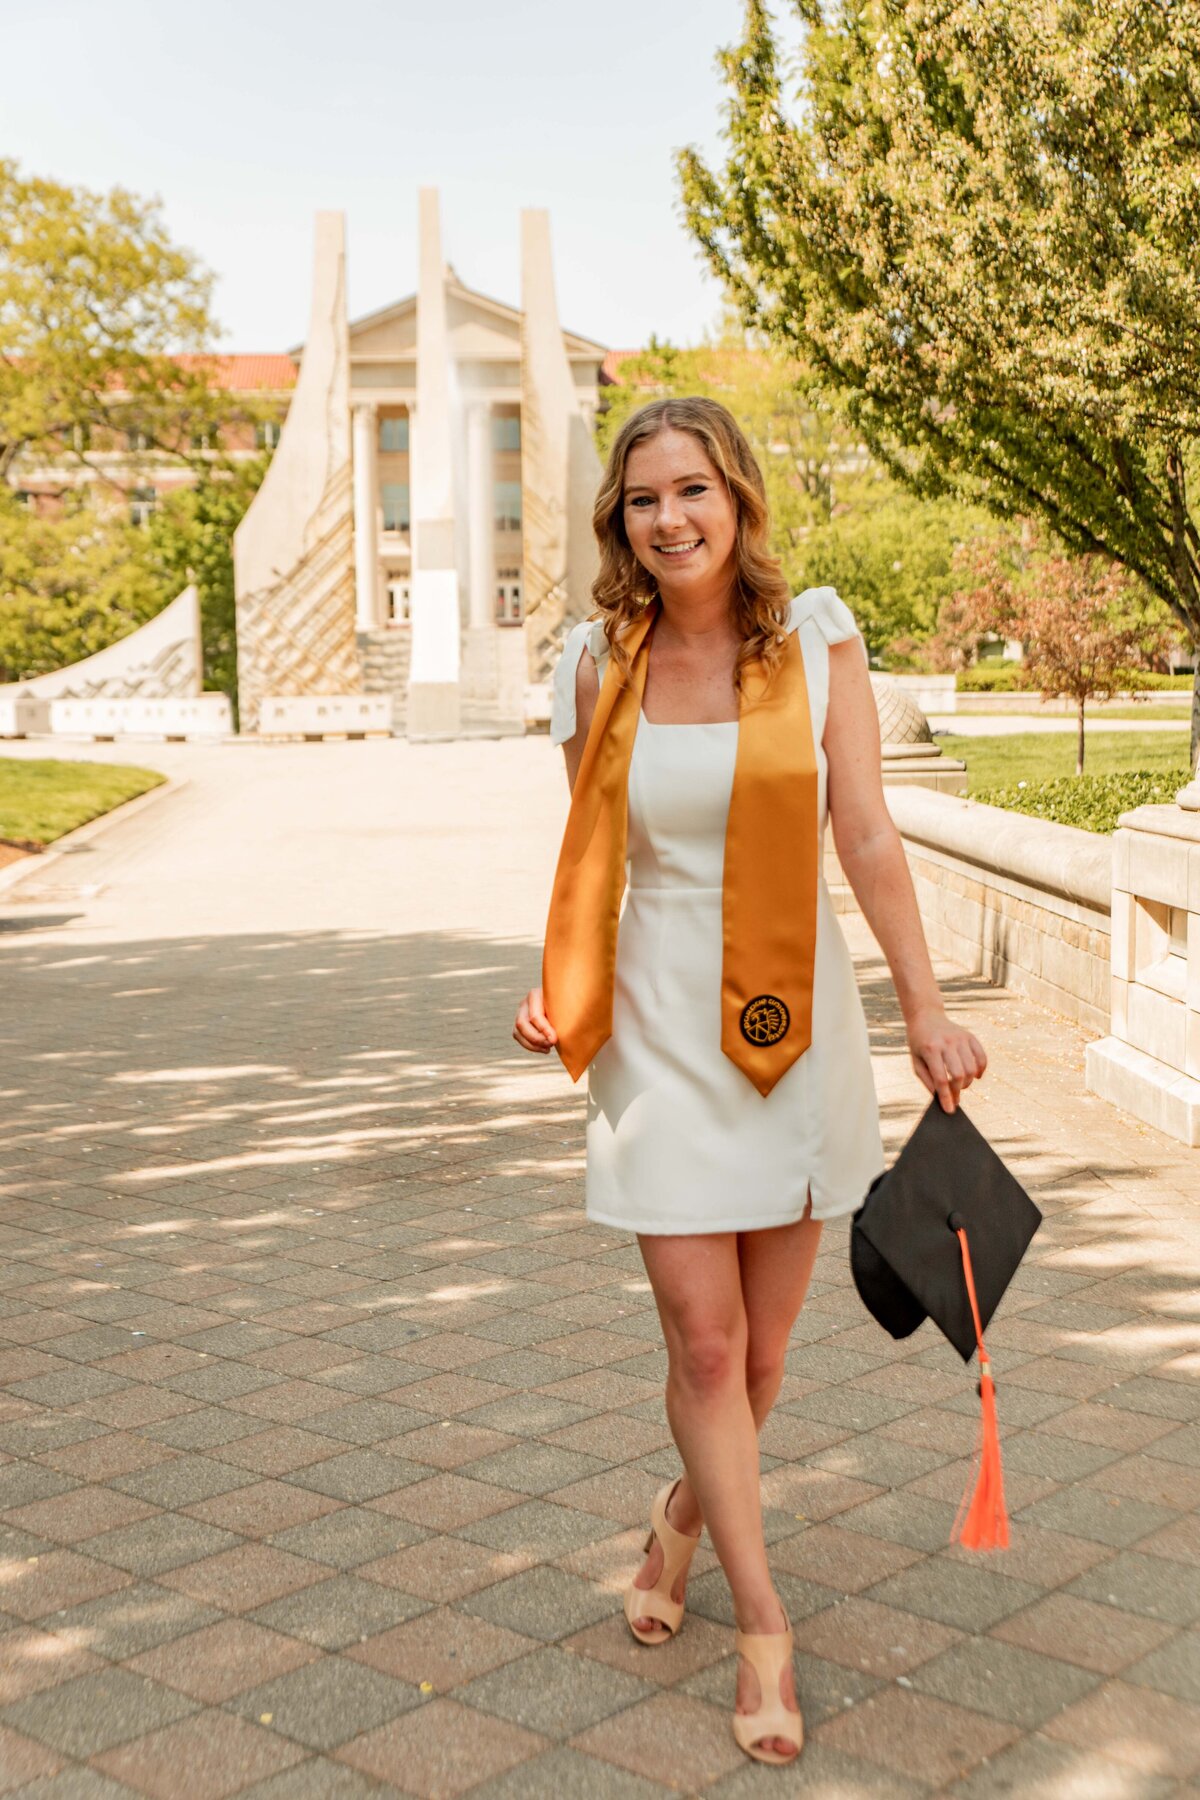 Girl college graduate hired photographer to capture life event